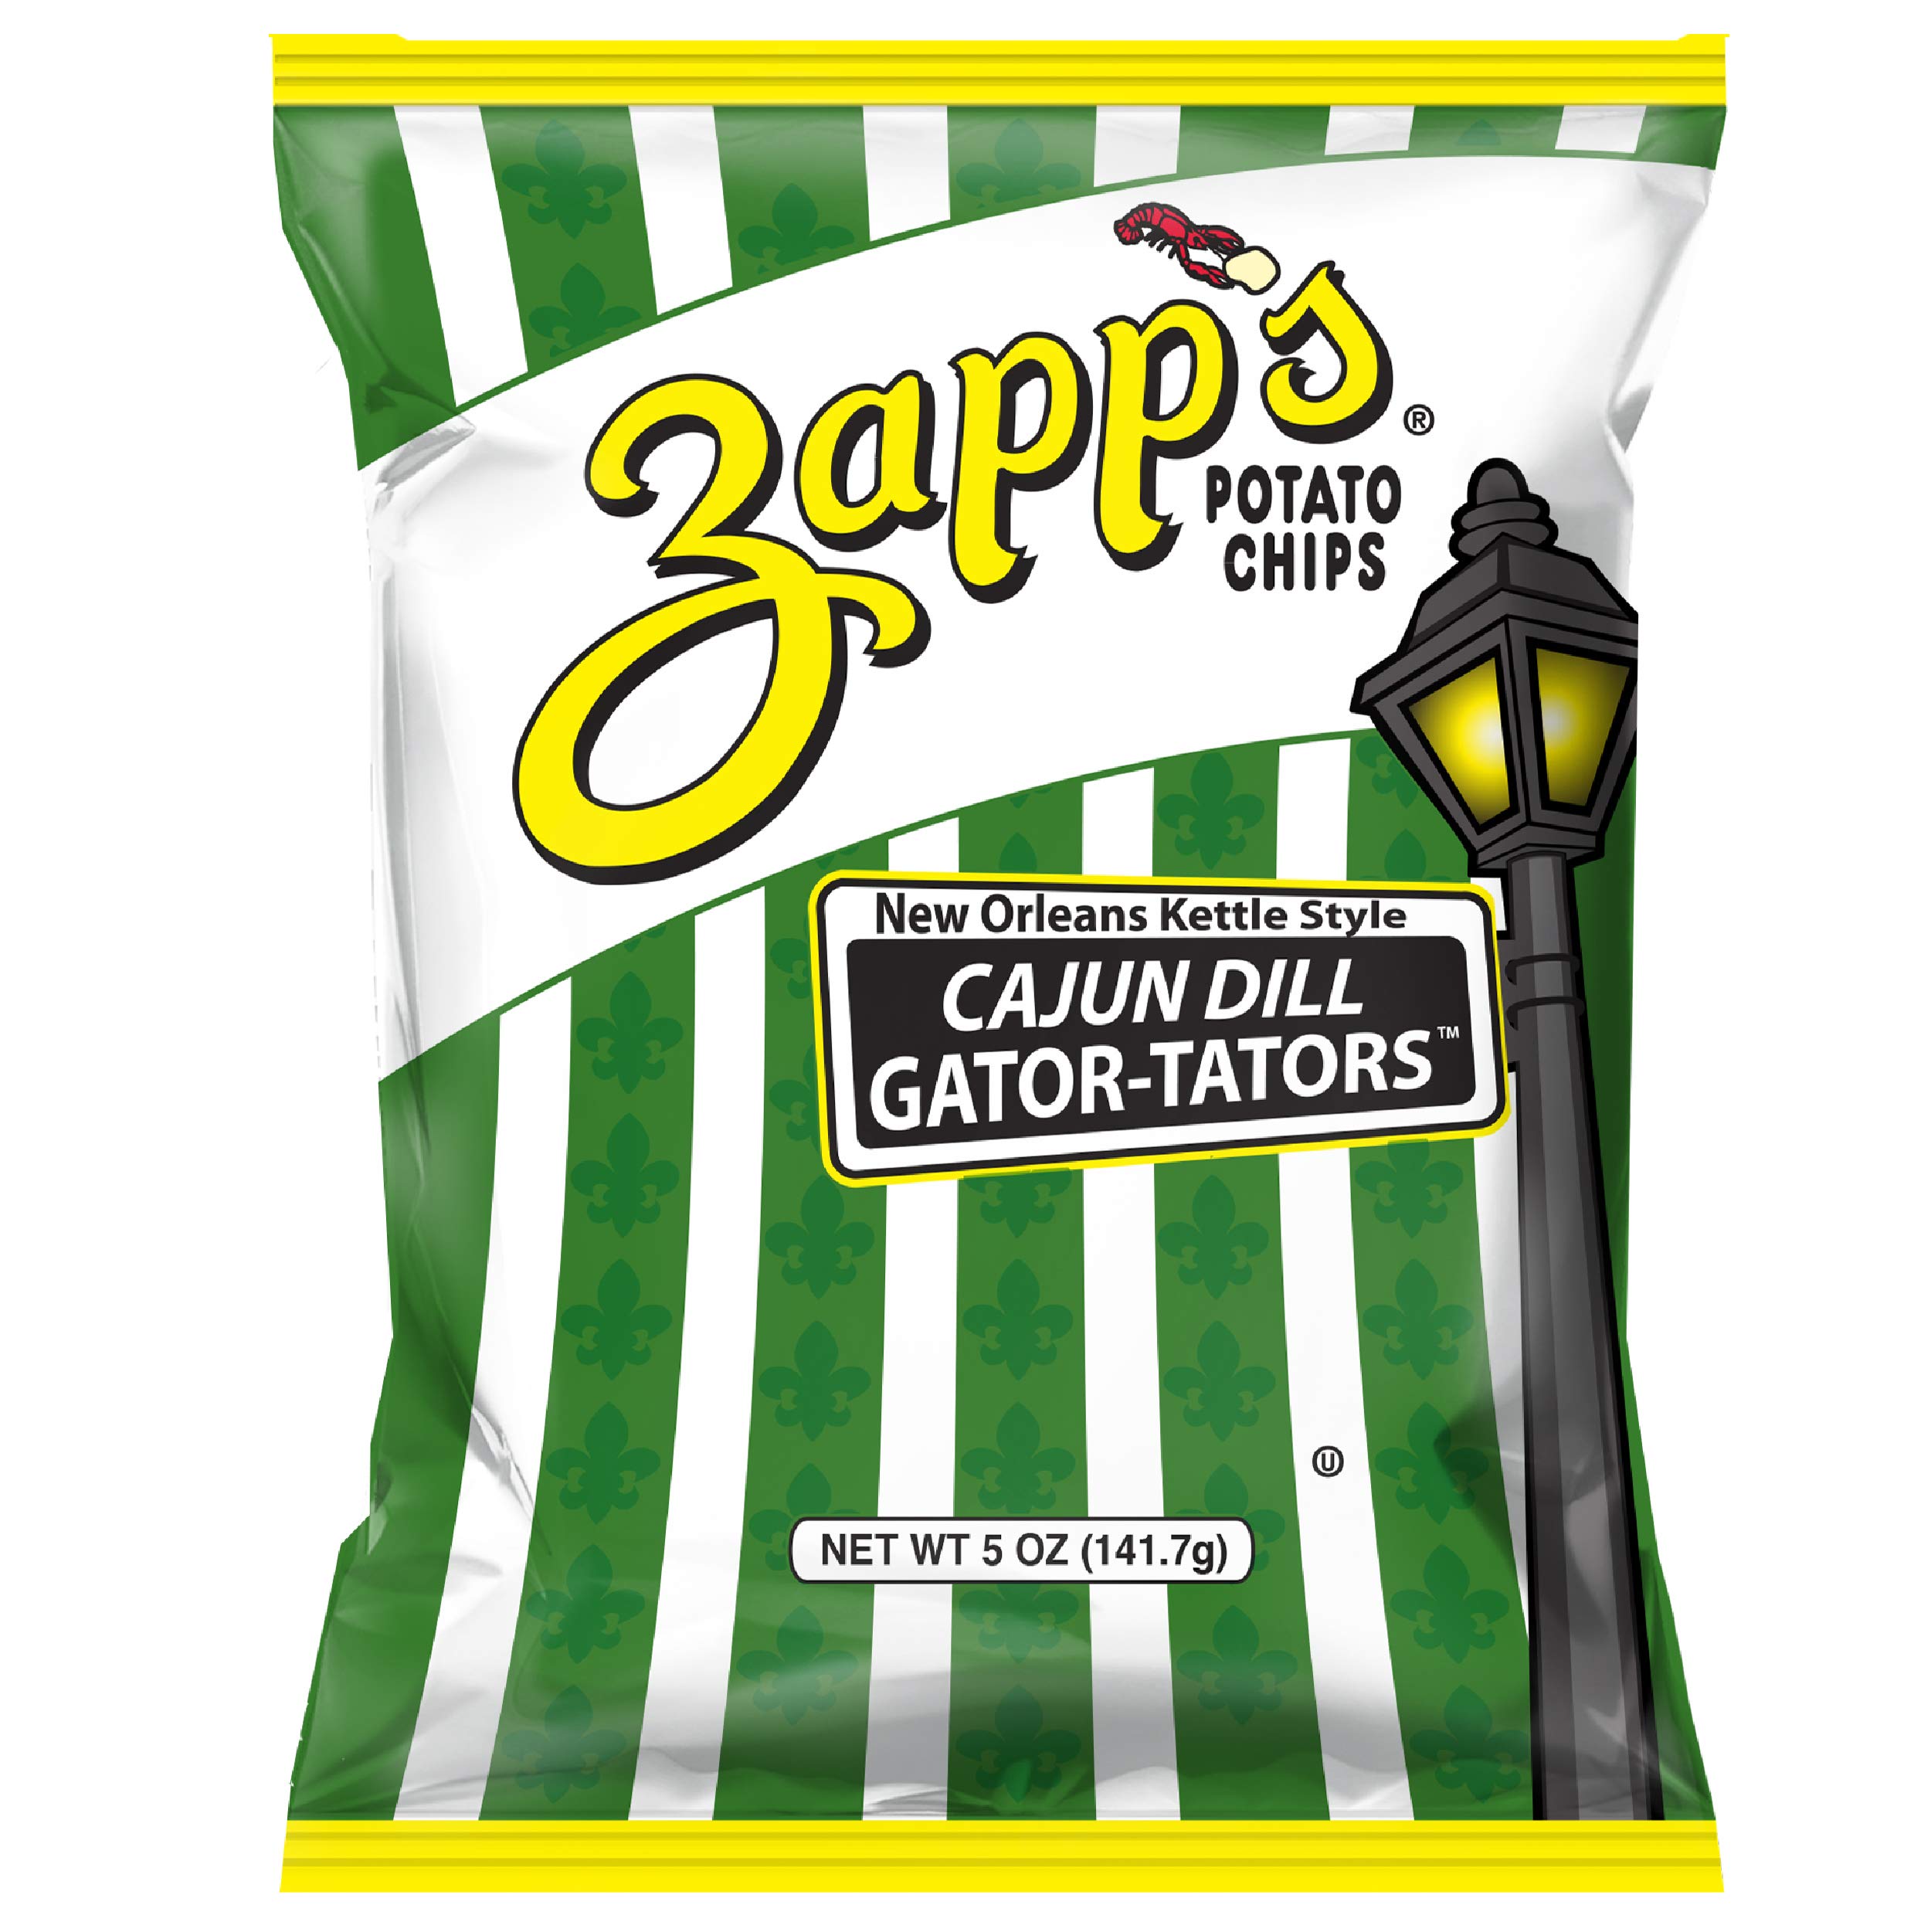 Zapp’s New Orleans Kettle-Style Potato Chips, Cajun Dill Gator-Tator – Crunchy Chips with a Spicy Kick, Great for Lunches or Snacking on the Go, 5 ...